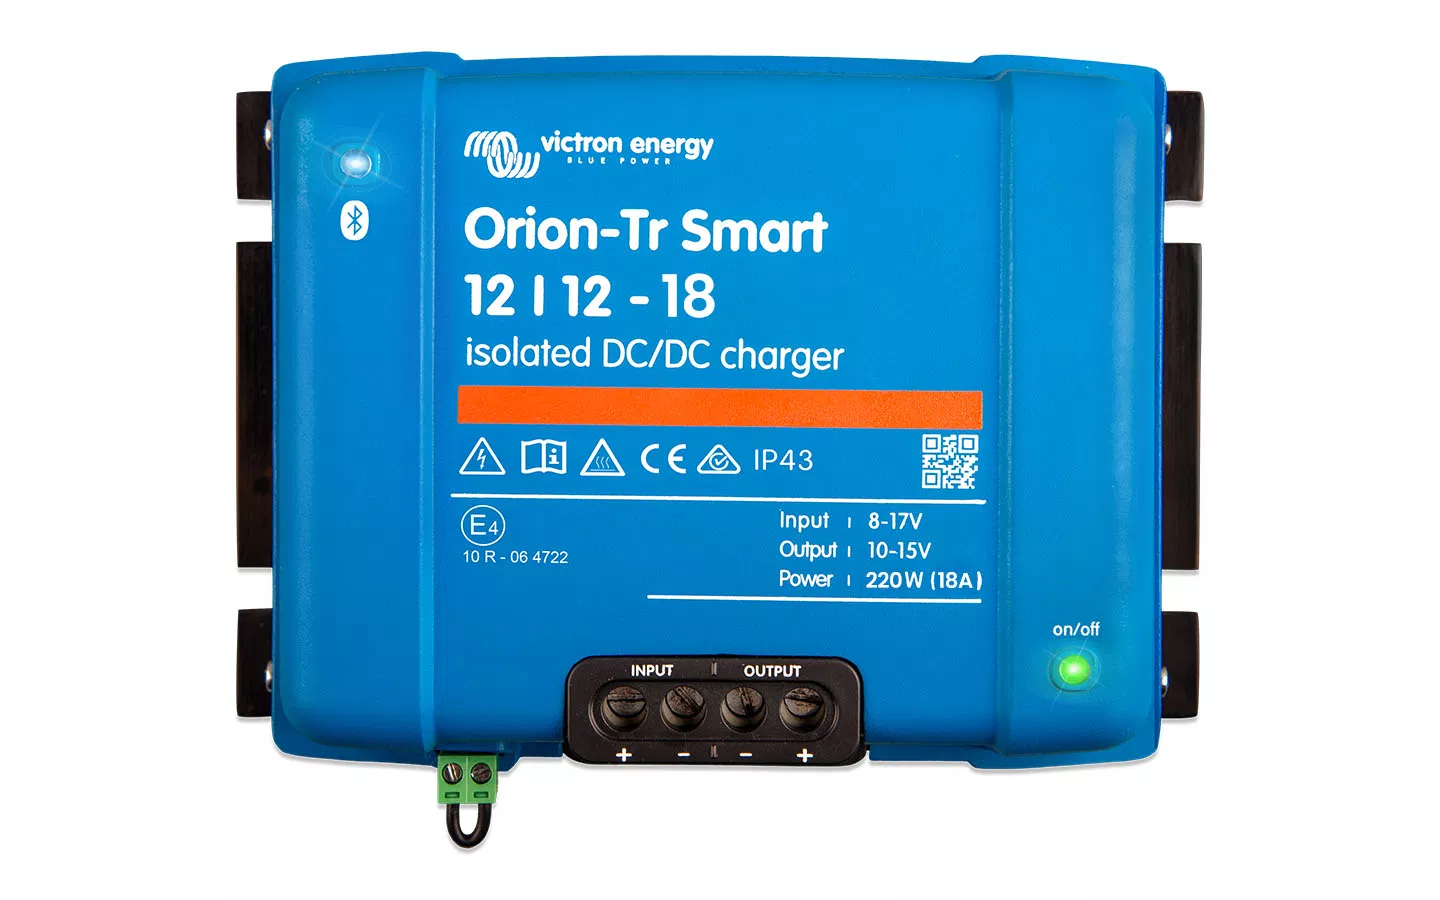 Orion-TR DC/DC 12/12 Smart Charger